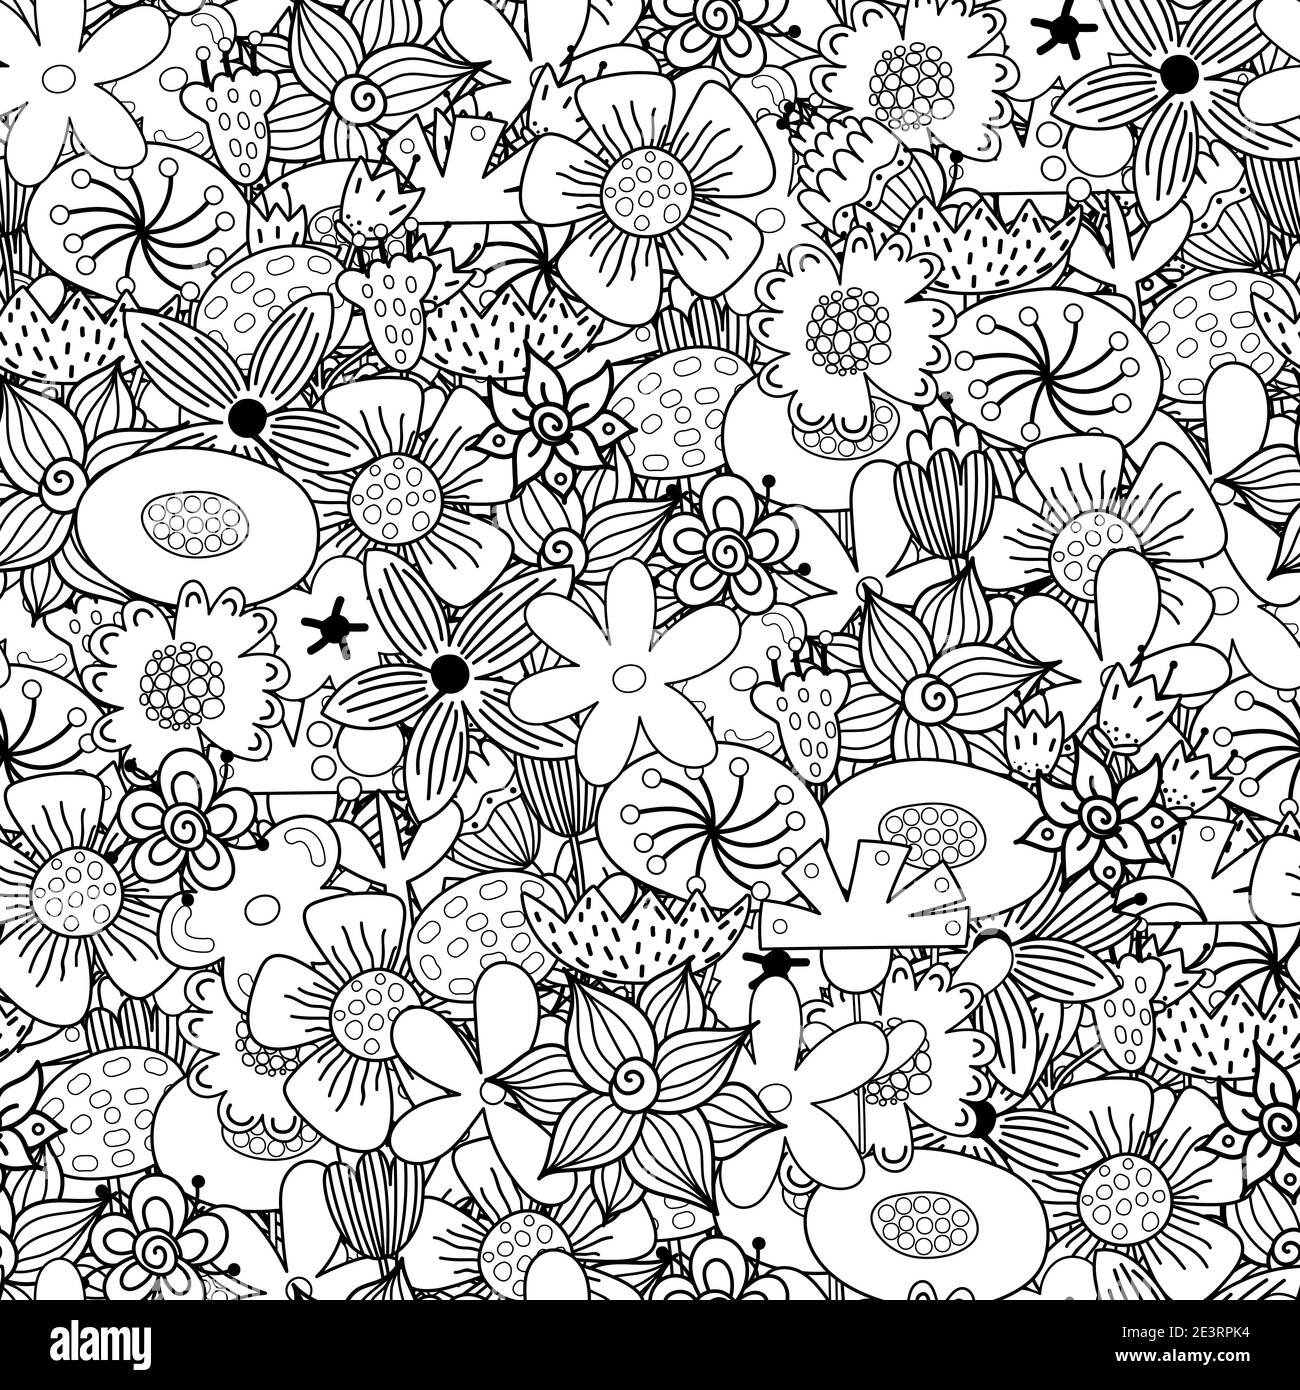 Fantasy garden seamless pattern. Doodle flowers coloring page. Black and white floral print Stock Vector